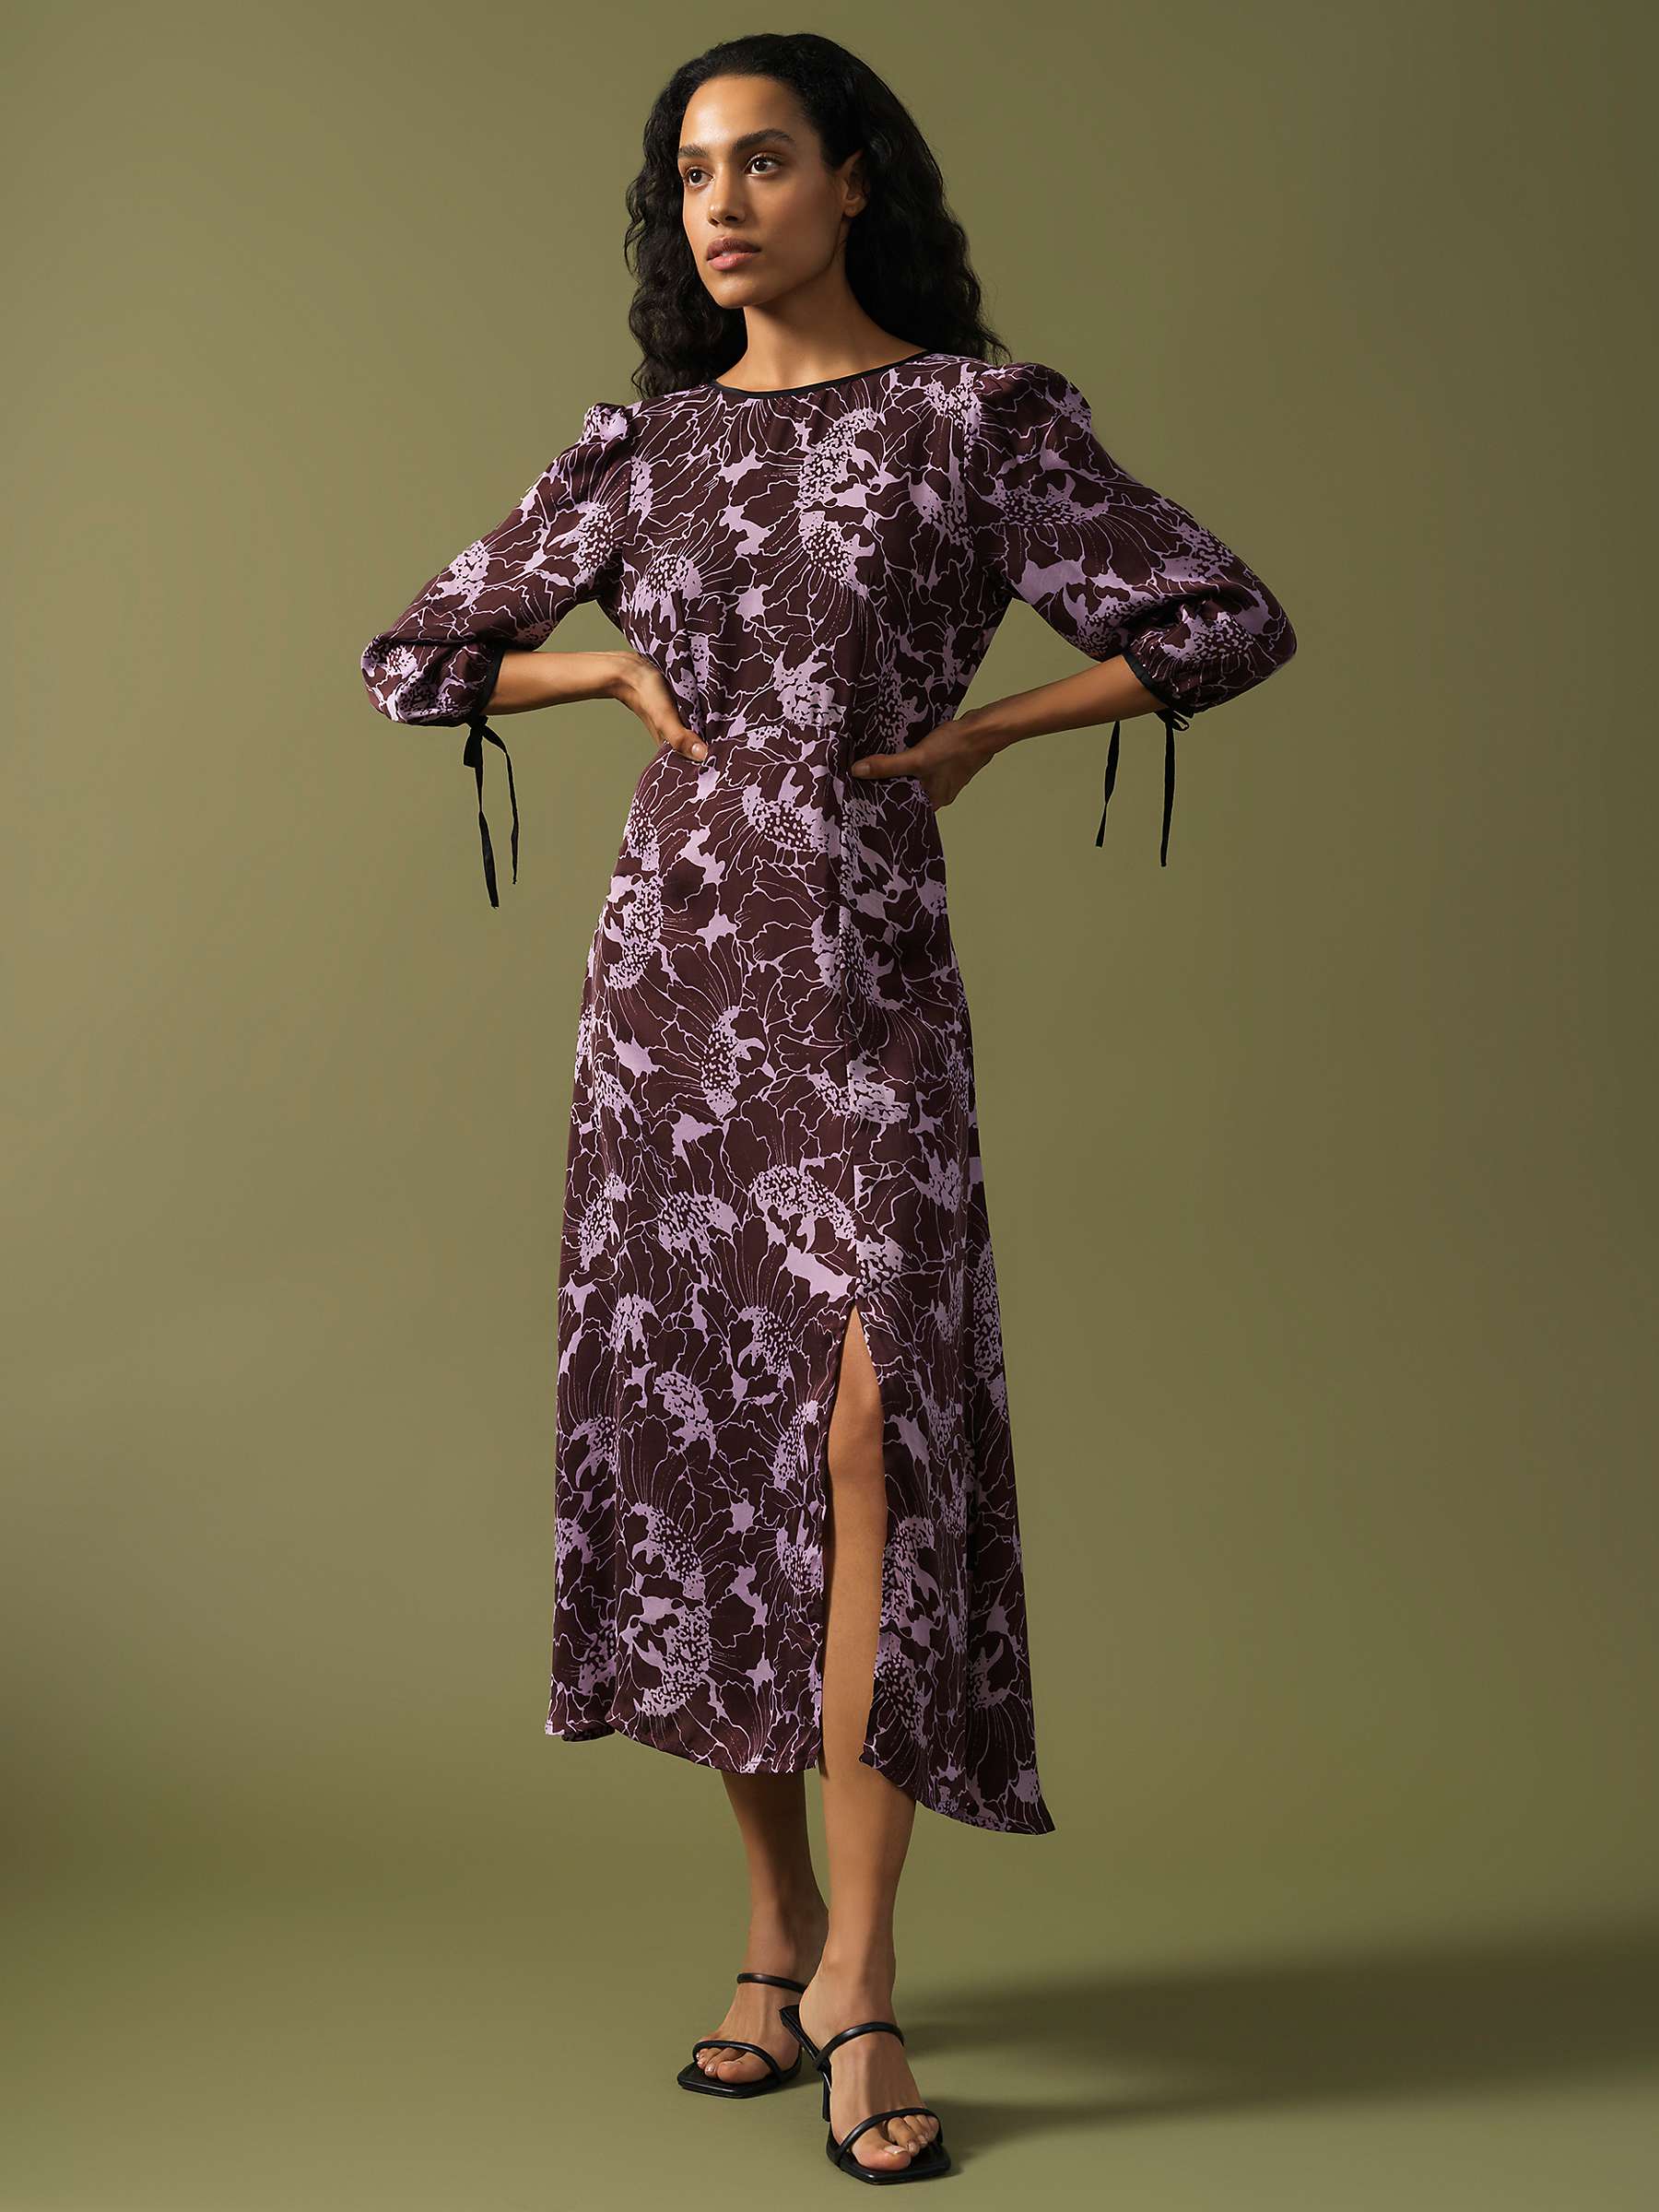 Buy Great Plains Mono Poppy Tie Back Dress, Cocoa Multi Online at johnlewis.com